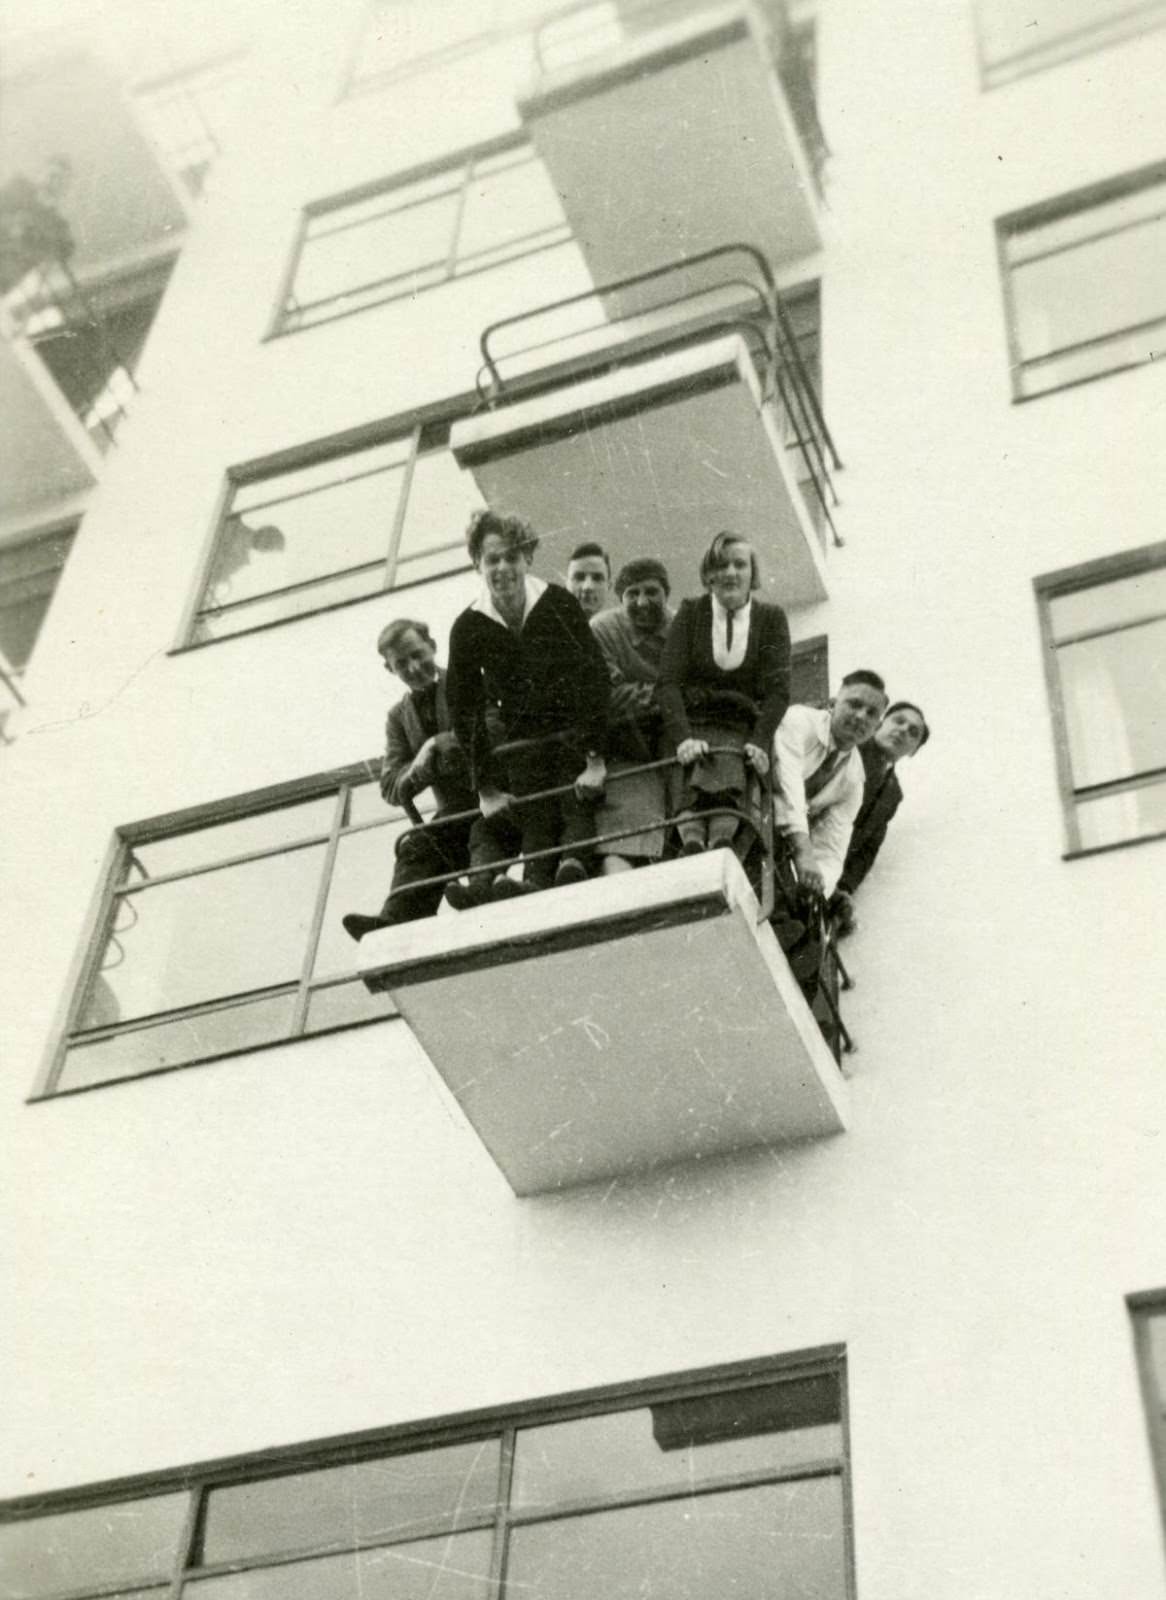 A Visual Journey into the Bauhaus School of the 1920s - Pioneers of Modern Design